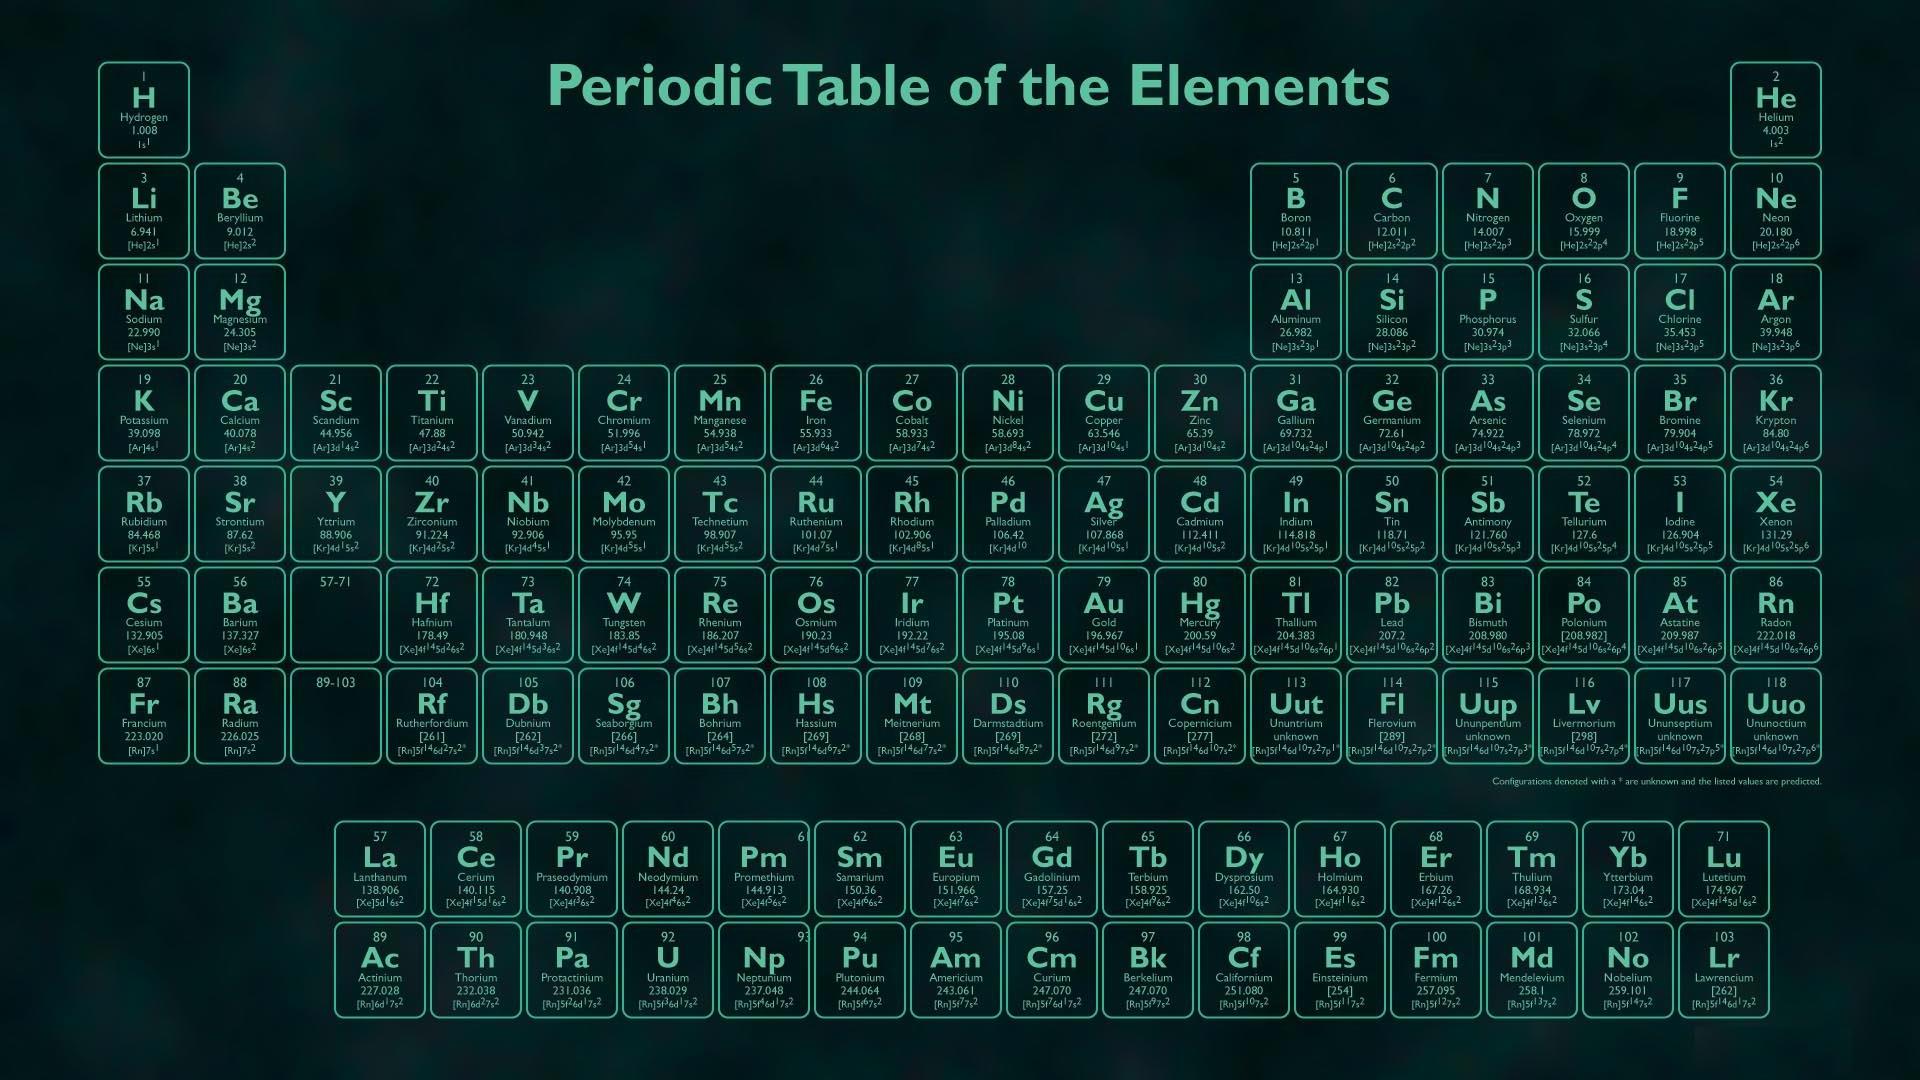 The Periodic Table. Wallpaper for Android - APK Download